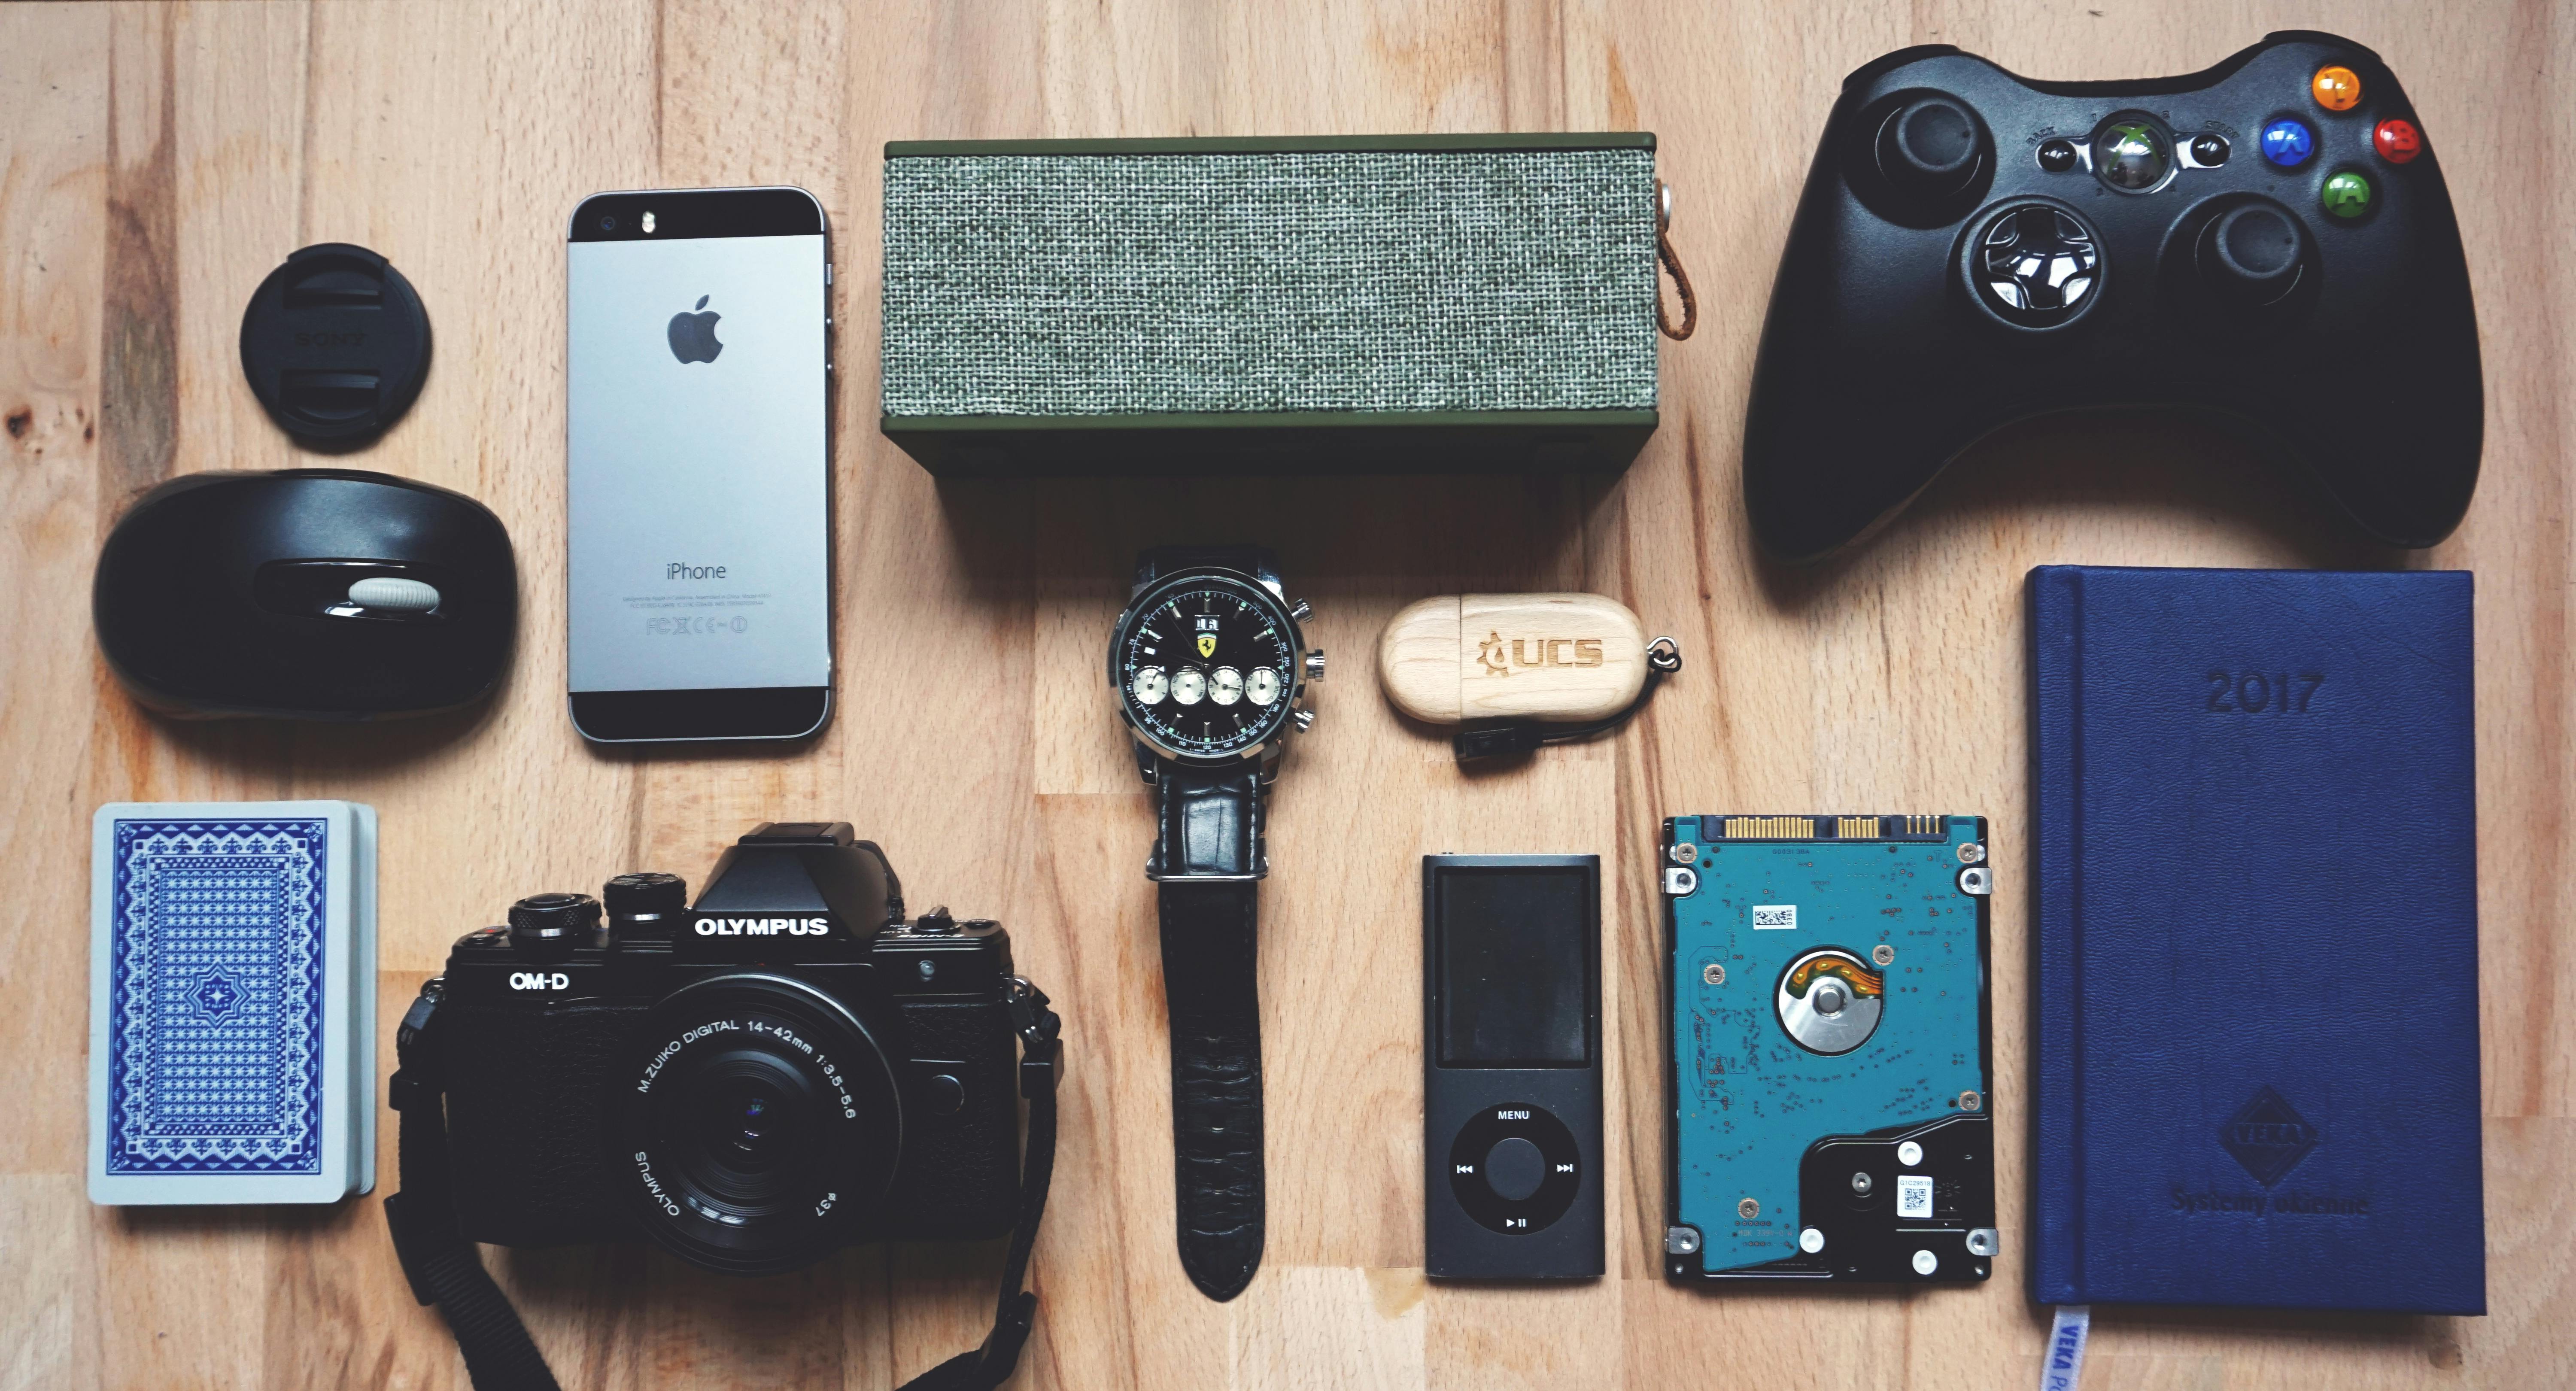 Gadgets Photos, Download The BEST Free Gadgets Stock Photos & HD Images